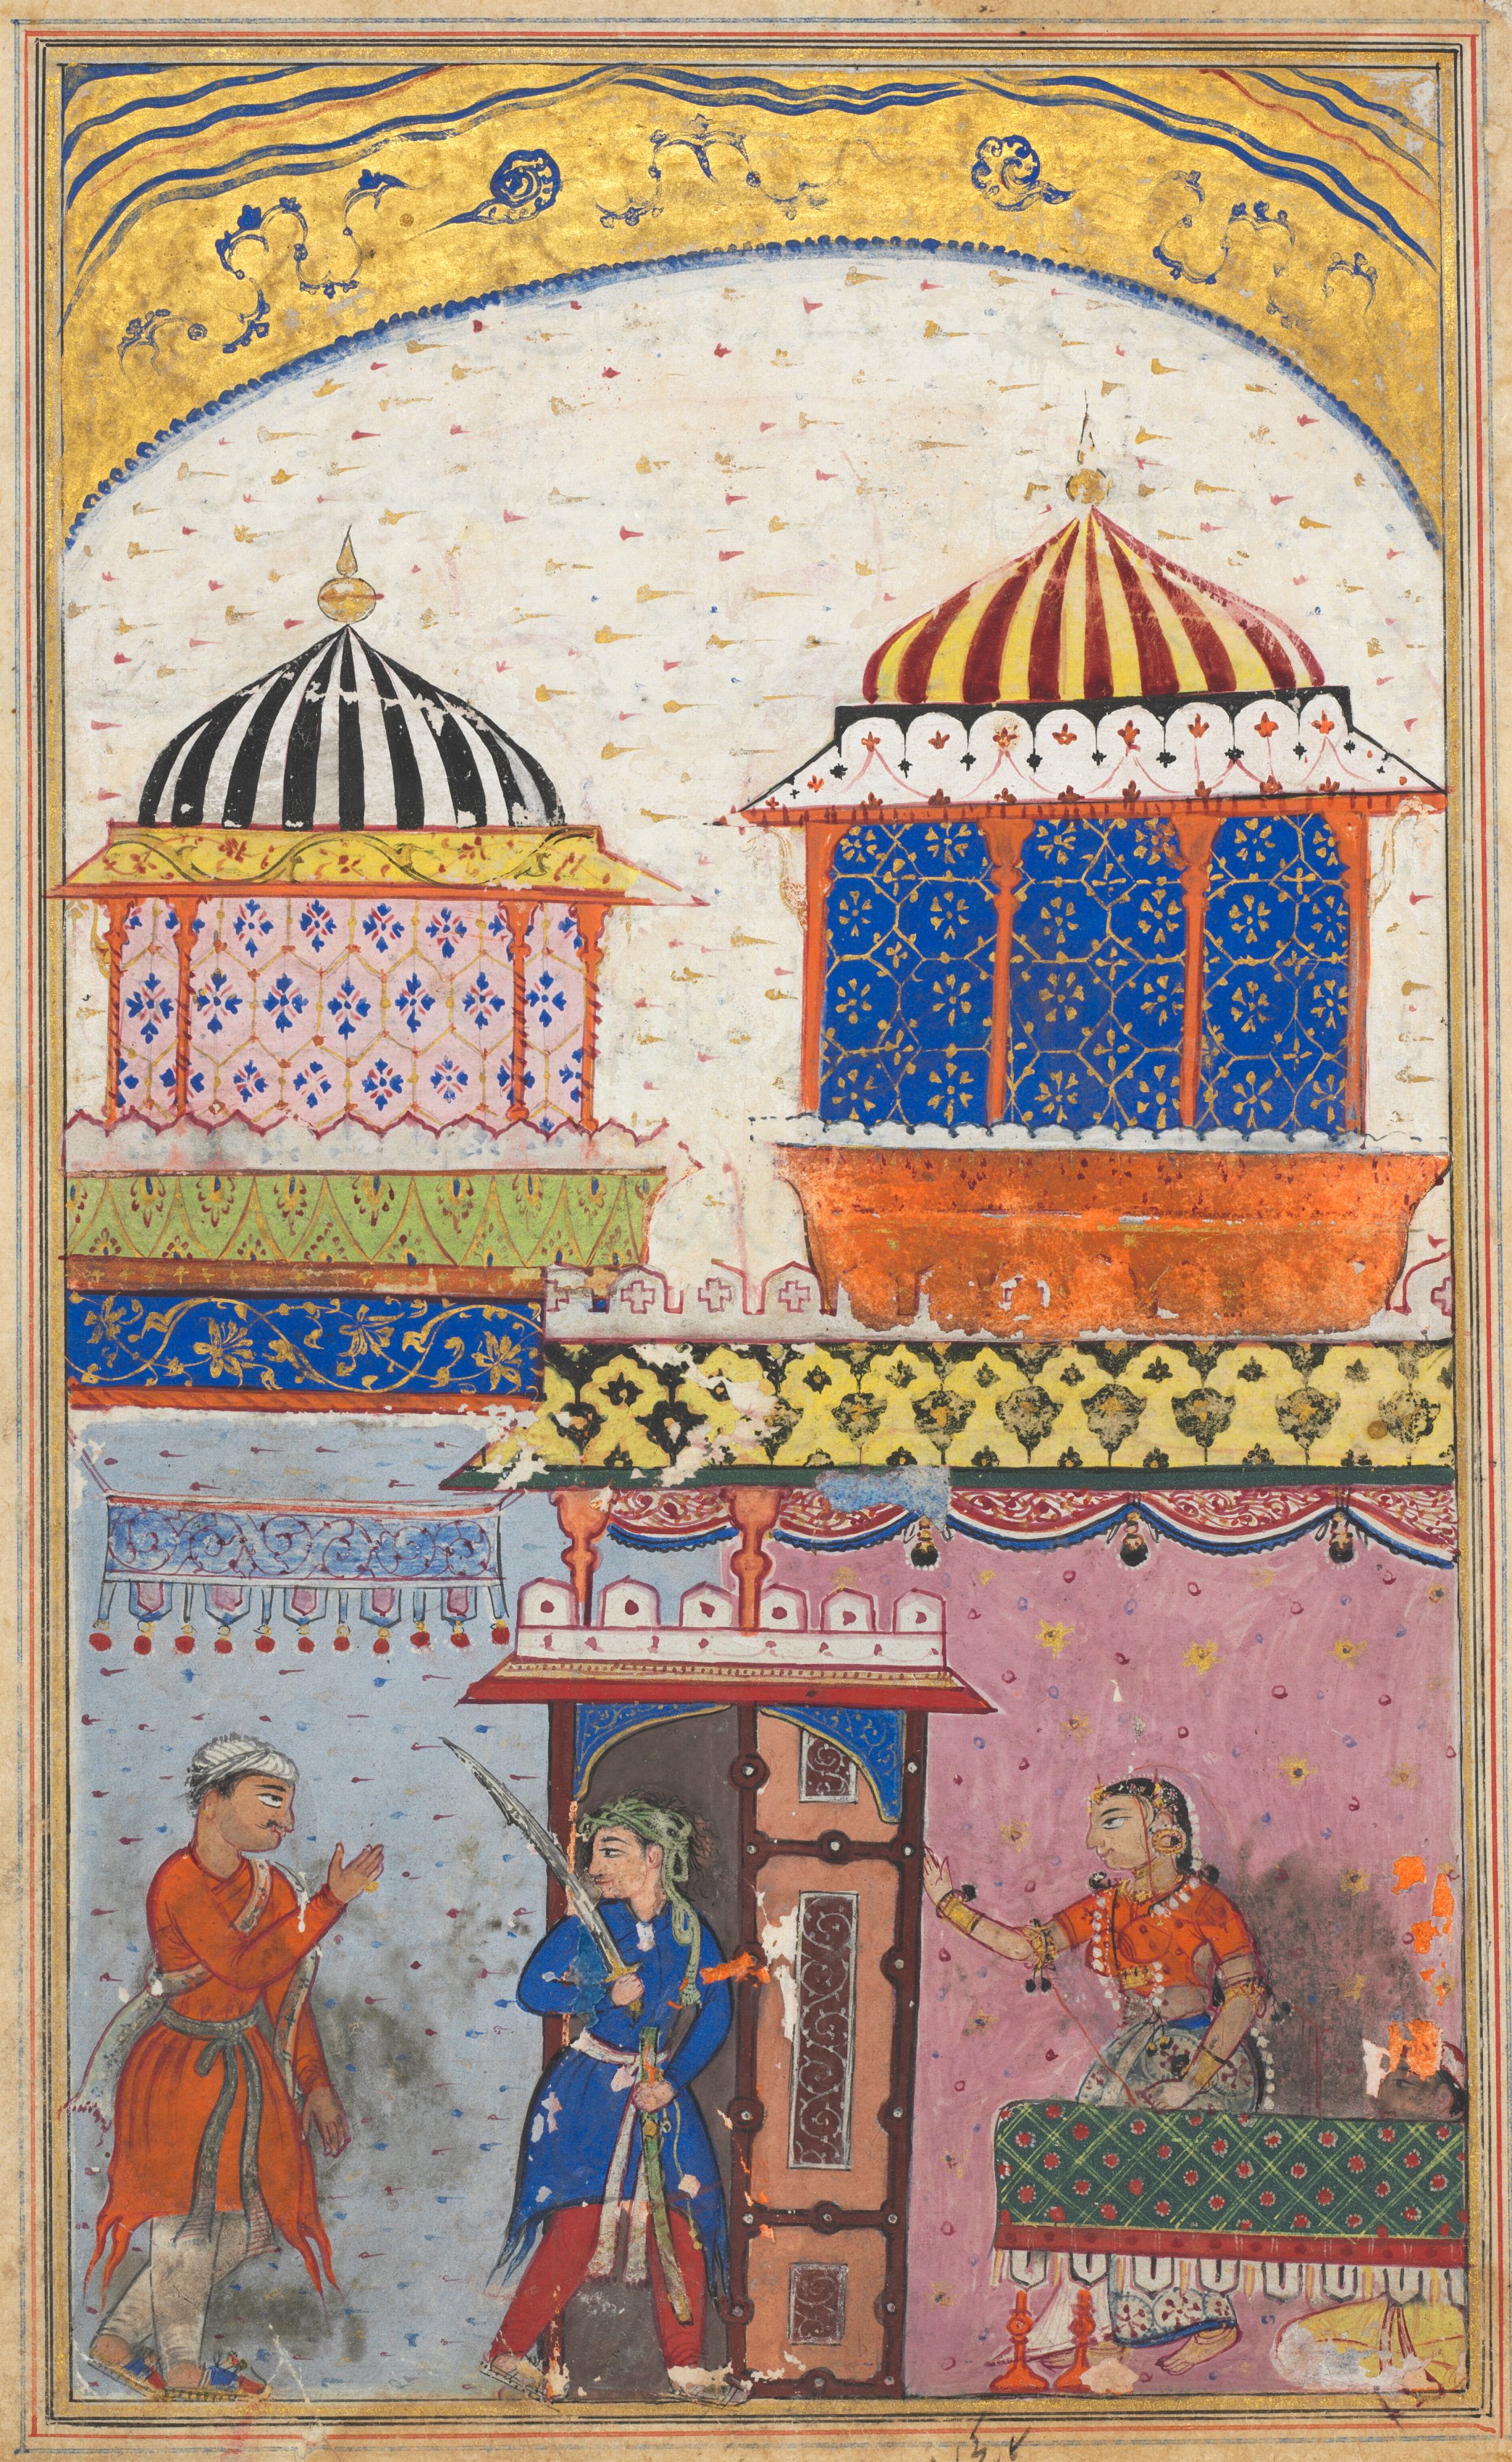 A woman asks her lover to leave her house, brandishing his sword and feigning rage in order to deceive her husband who has just arrived, from a Tuti-nama (Tales of a Parrot): Eighth Night